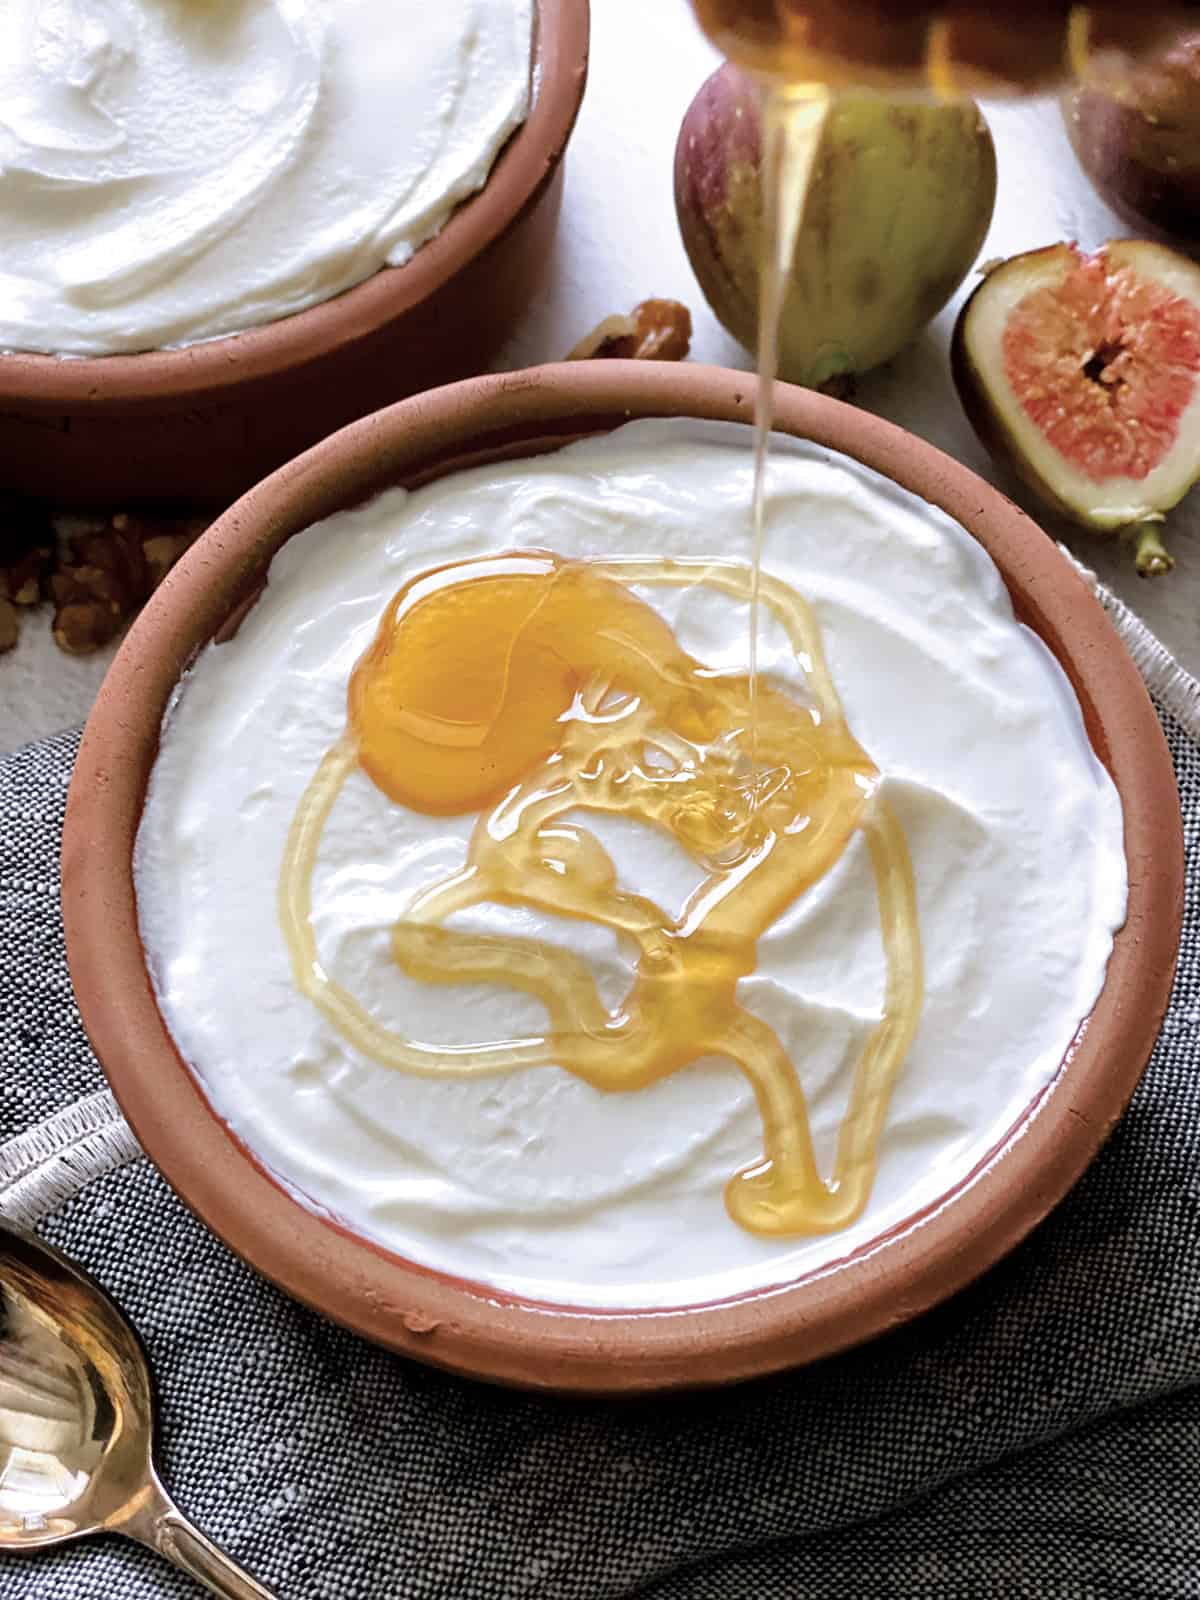 A bowl with yogurt, a honey dipper dripping honey, a spoon on a cloth napkin, fig halves, walnuts, and a detail of another bowl.